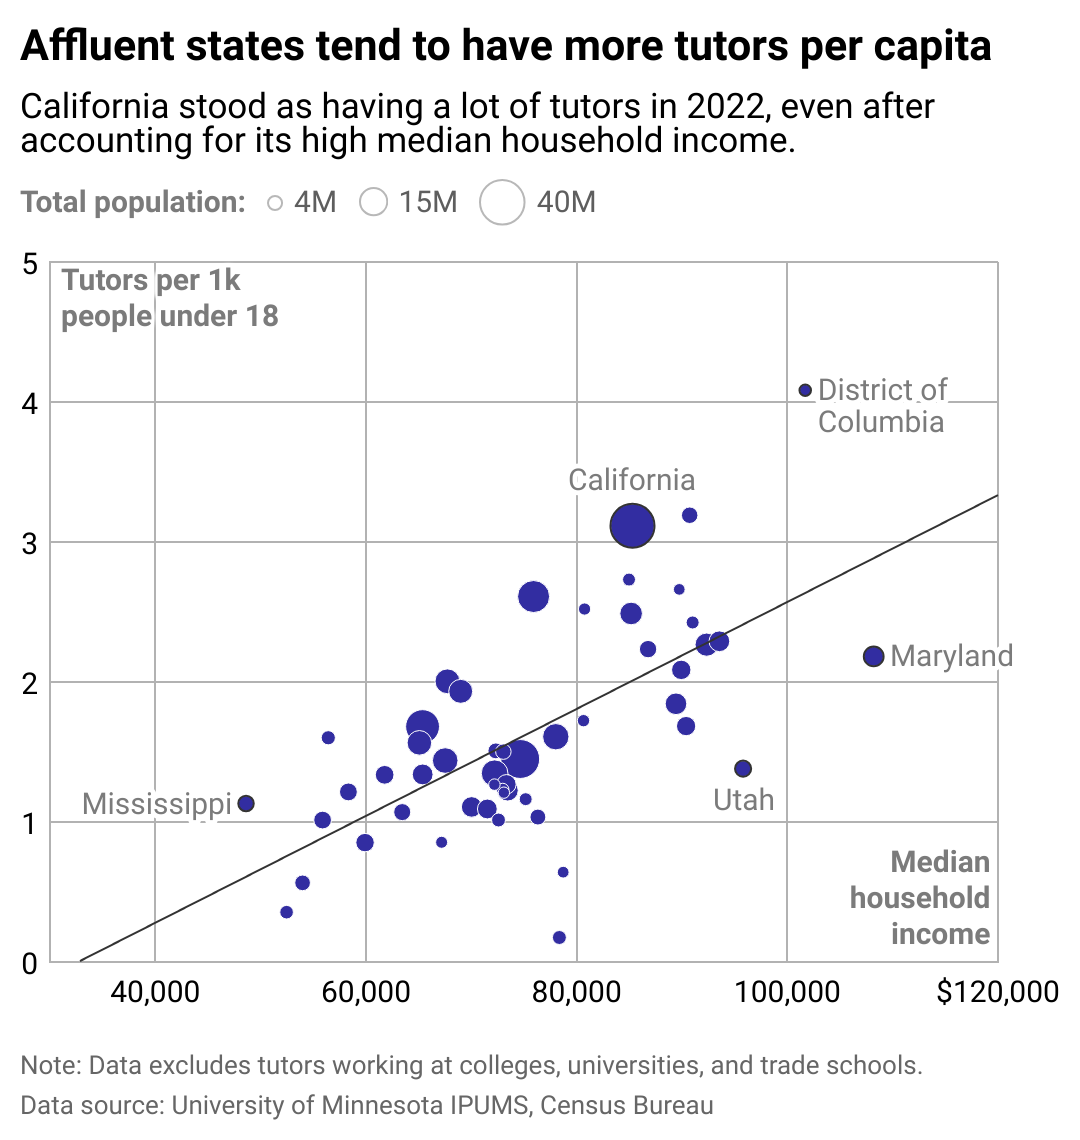 A scatterplot comparing tutors per capita vs median household income, by state. The two are positively correlated. California has a lot of tutors per capita, even after taking into account its relatively high income.